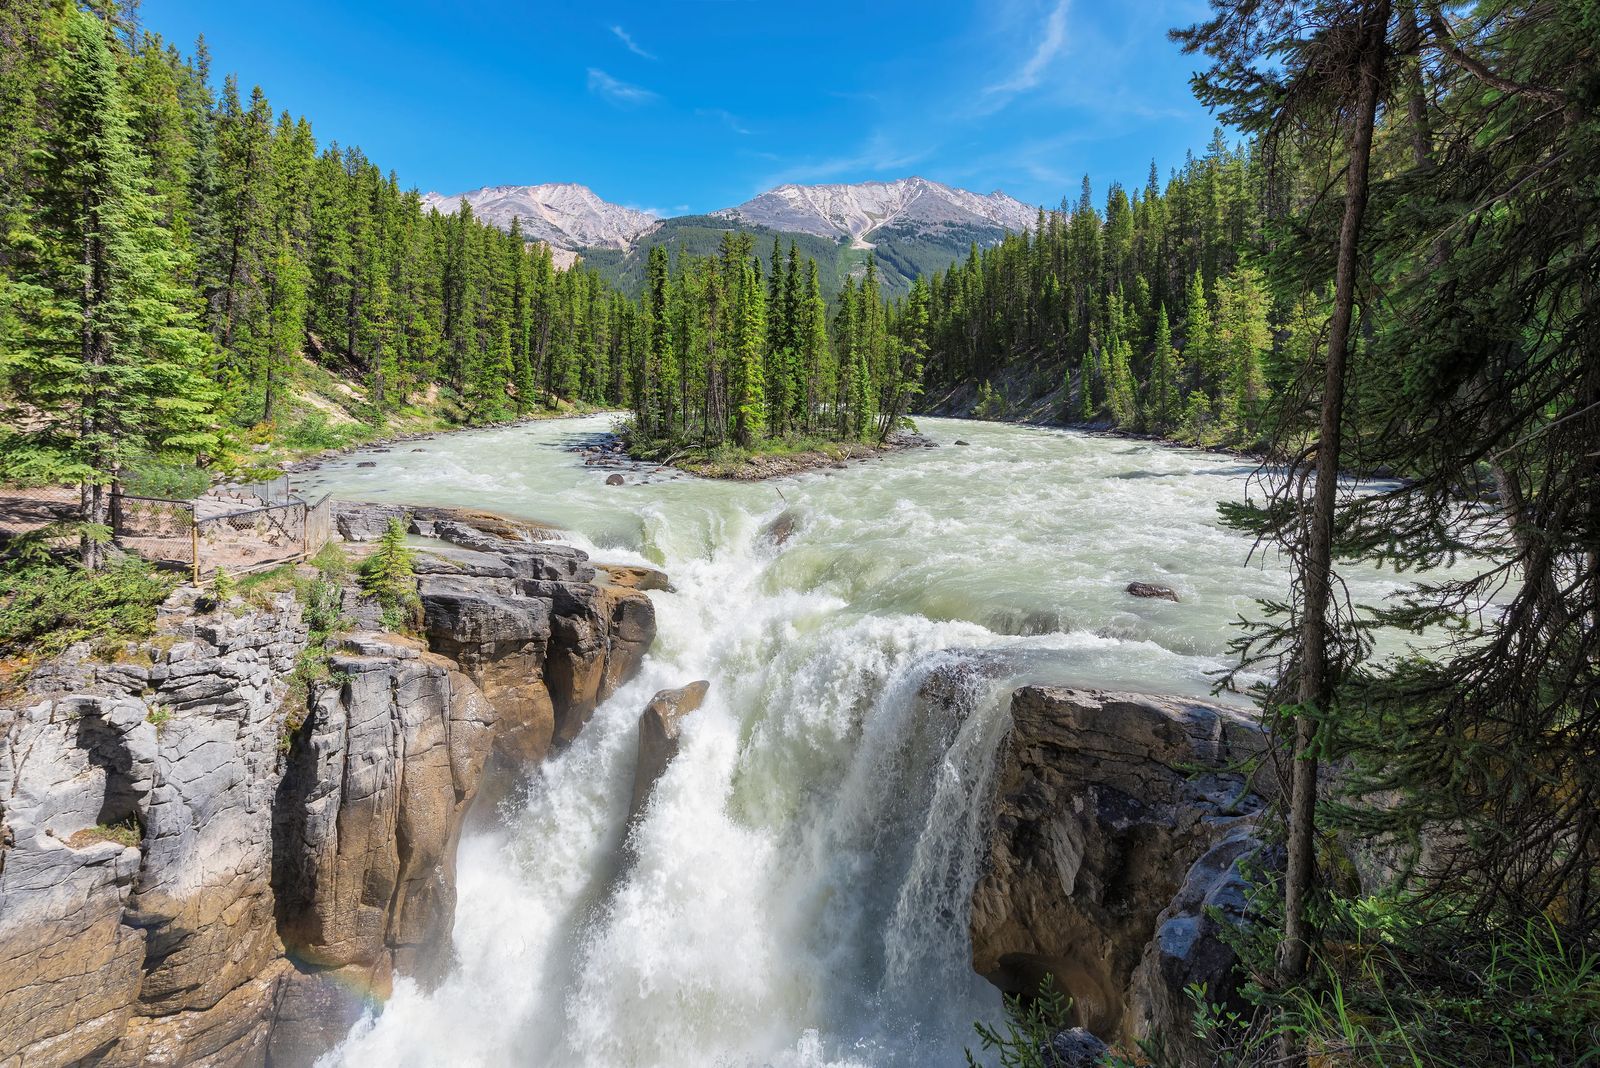 a raging river cuts around an island of trees then falls crashing into the canyon below this is Sunwapta Falls 